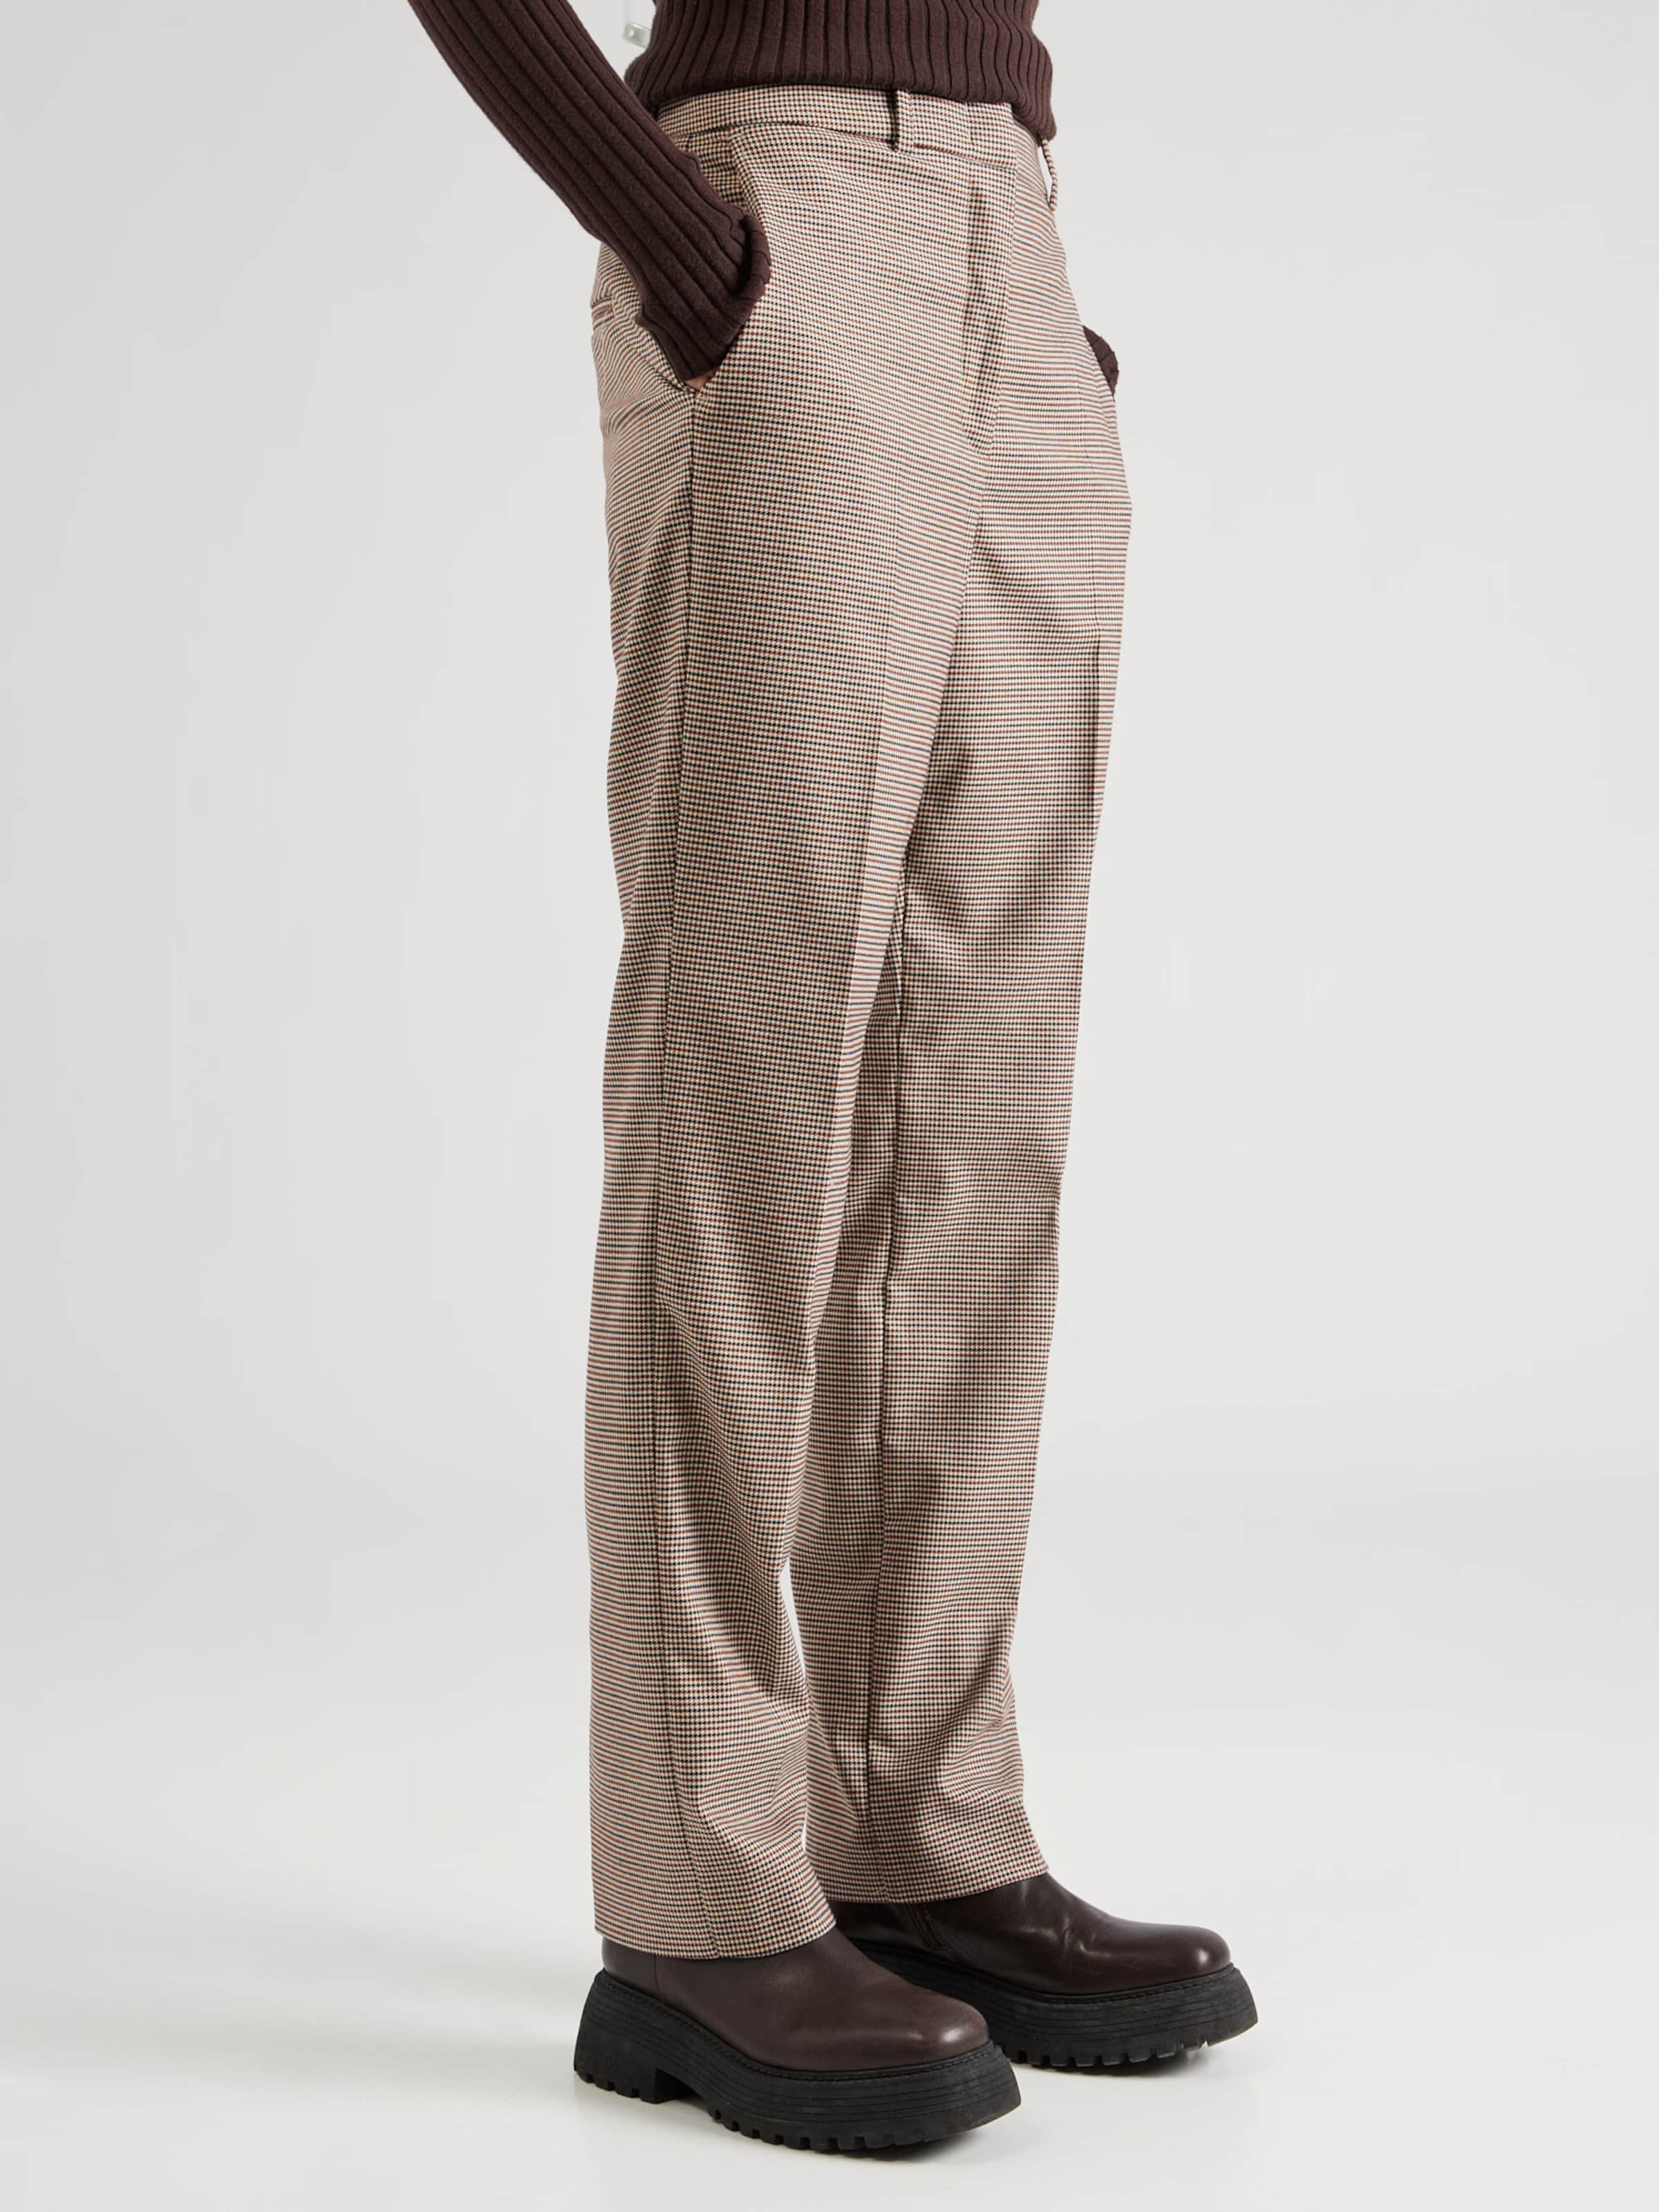 Buy Blue Trousers & Pants for Men by NEXT LOOK Online | Ajio.com